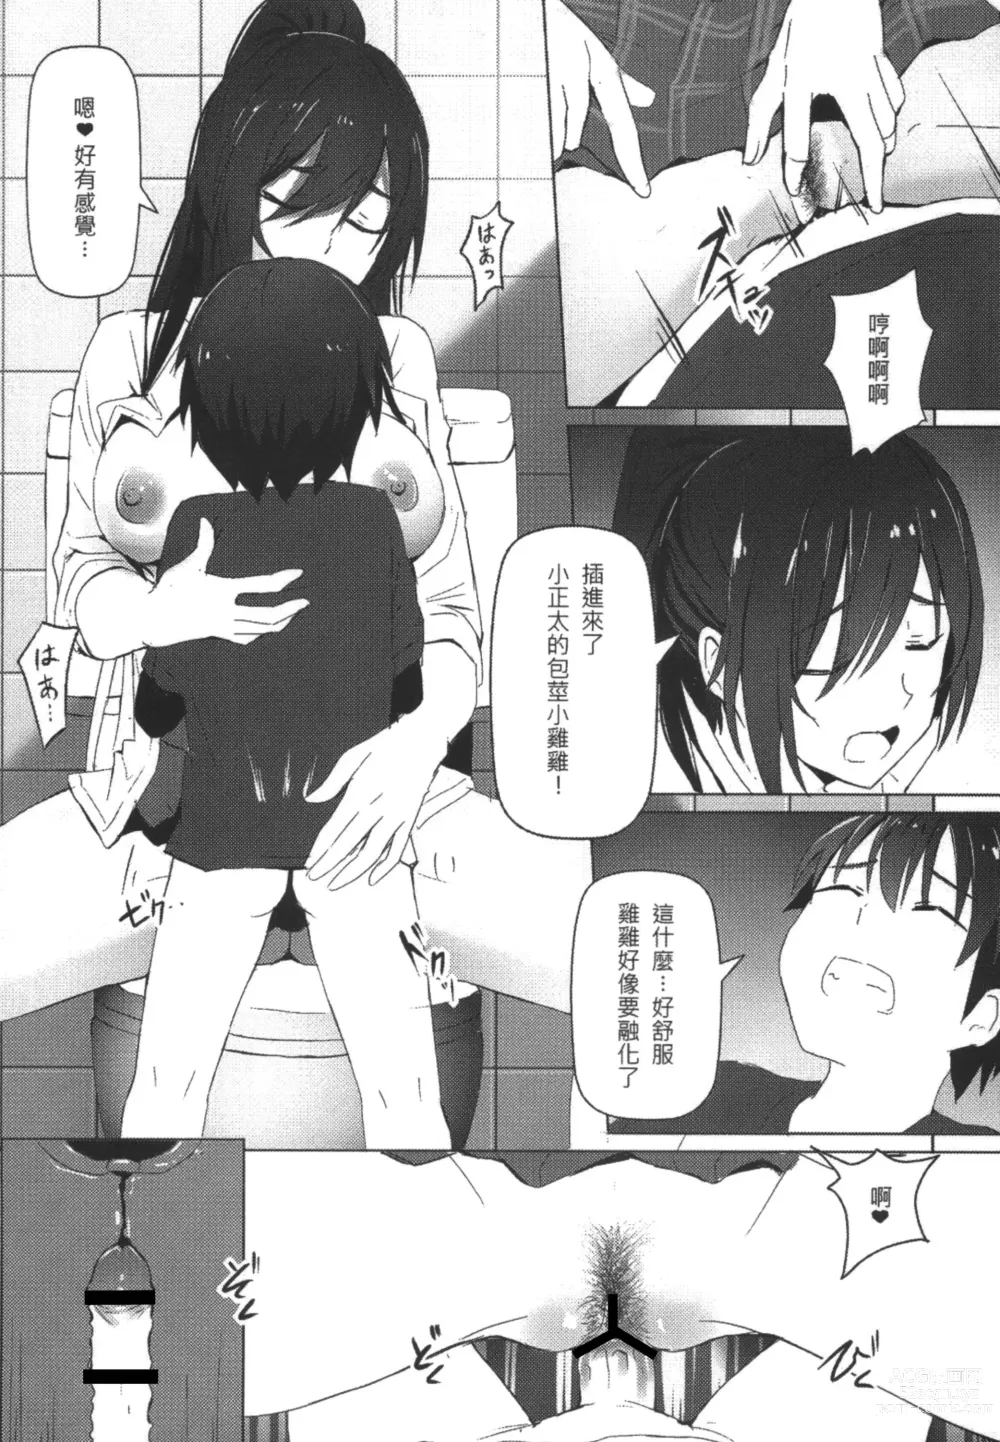 Page 14 of doujinshi Shirases Strategies against Perverts in the New Year